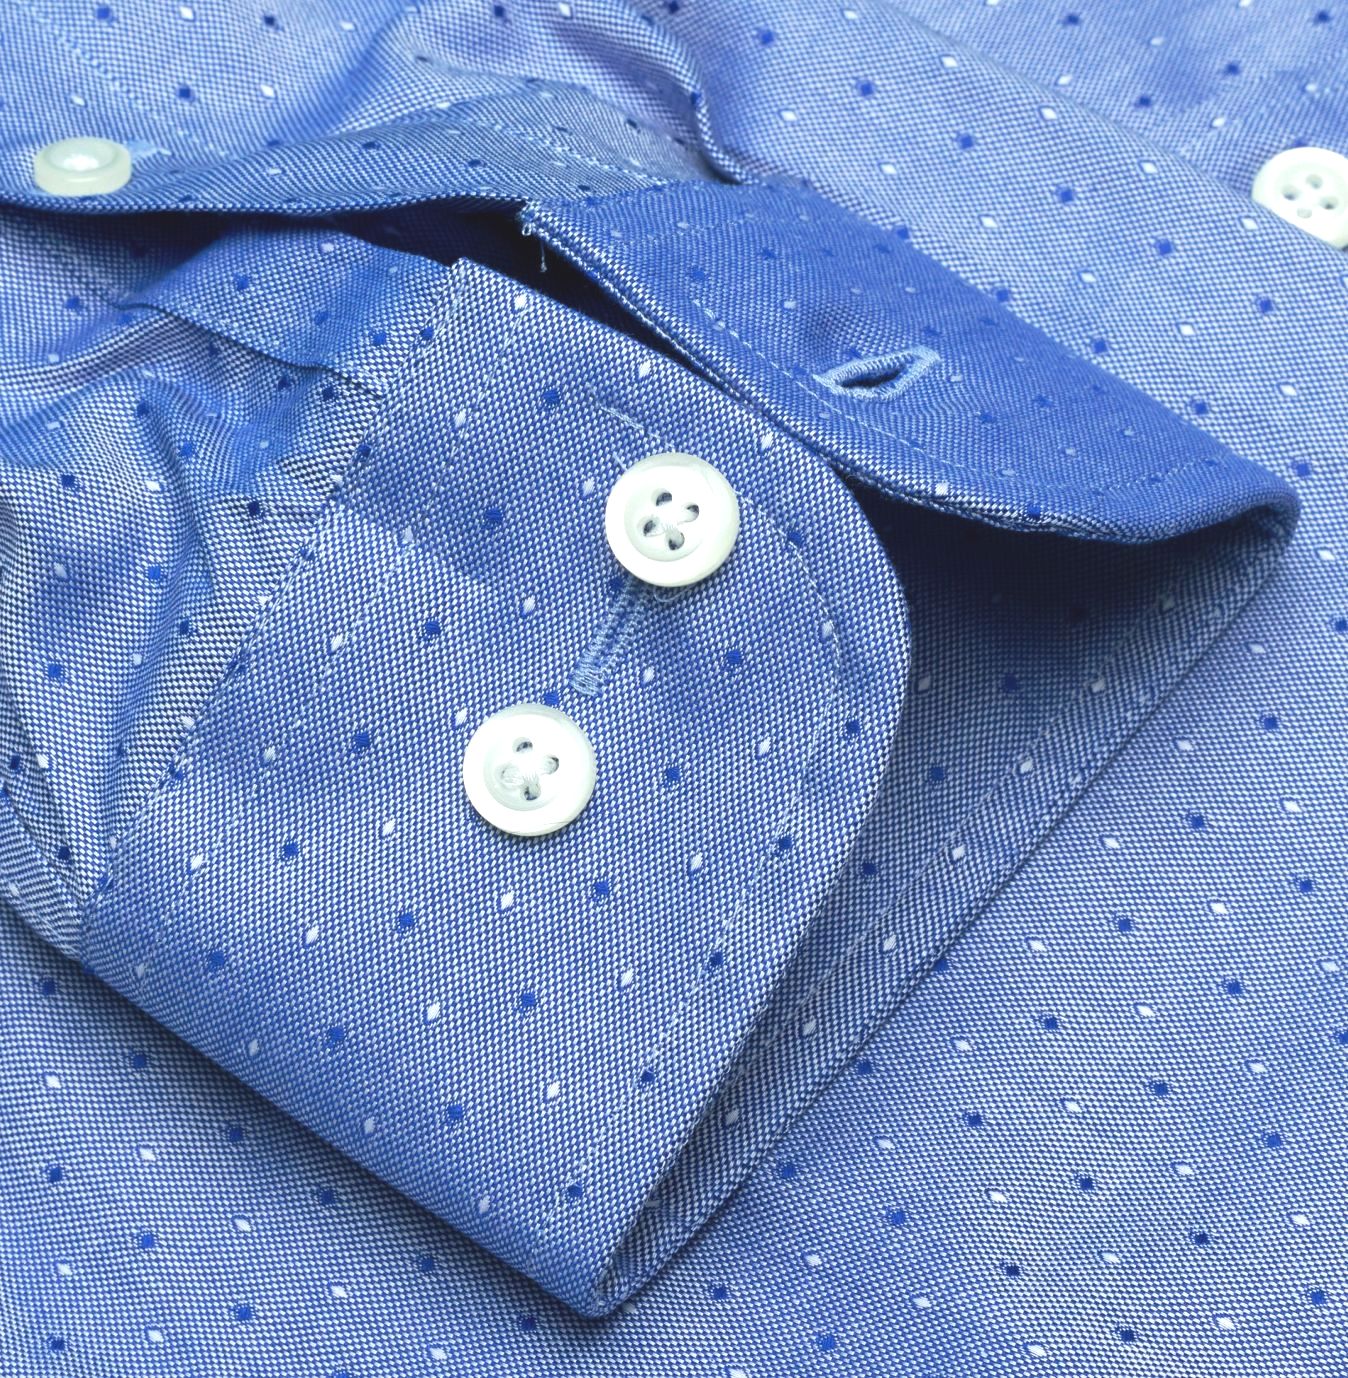 Blue Dobby Clip Dot Stretch Cotton Wrinkle-Free Dress Shirt with Spread Collar by Cooper & Stewart